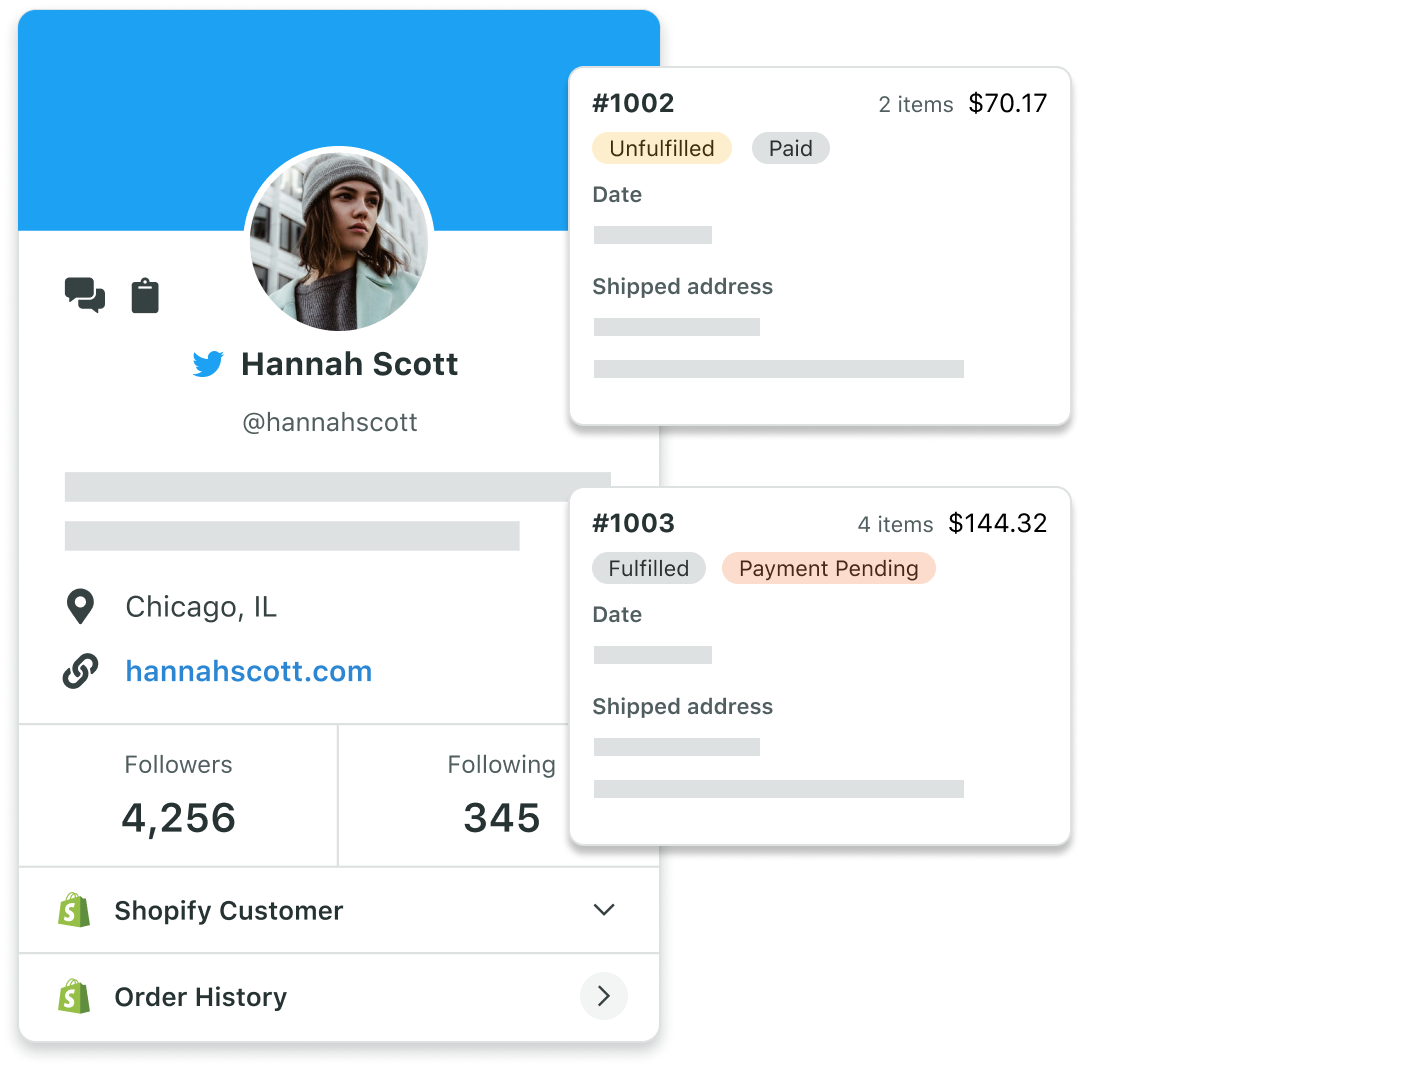 Offer more personalized responses with Sprout’s Contact Profile Views, which provide helpful message context including detailed order information and full purchase history.